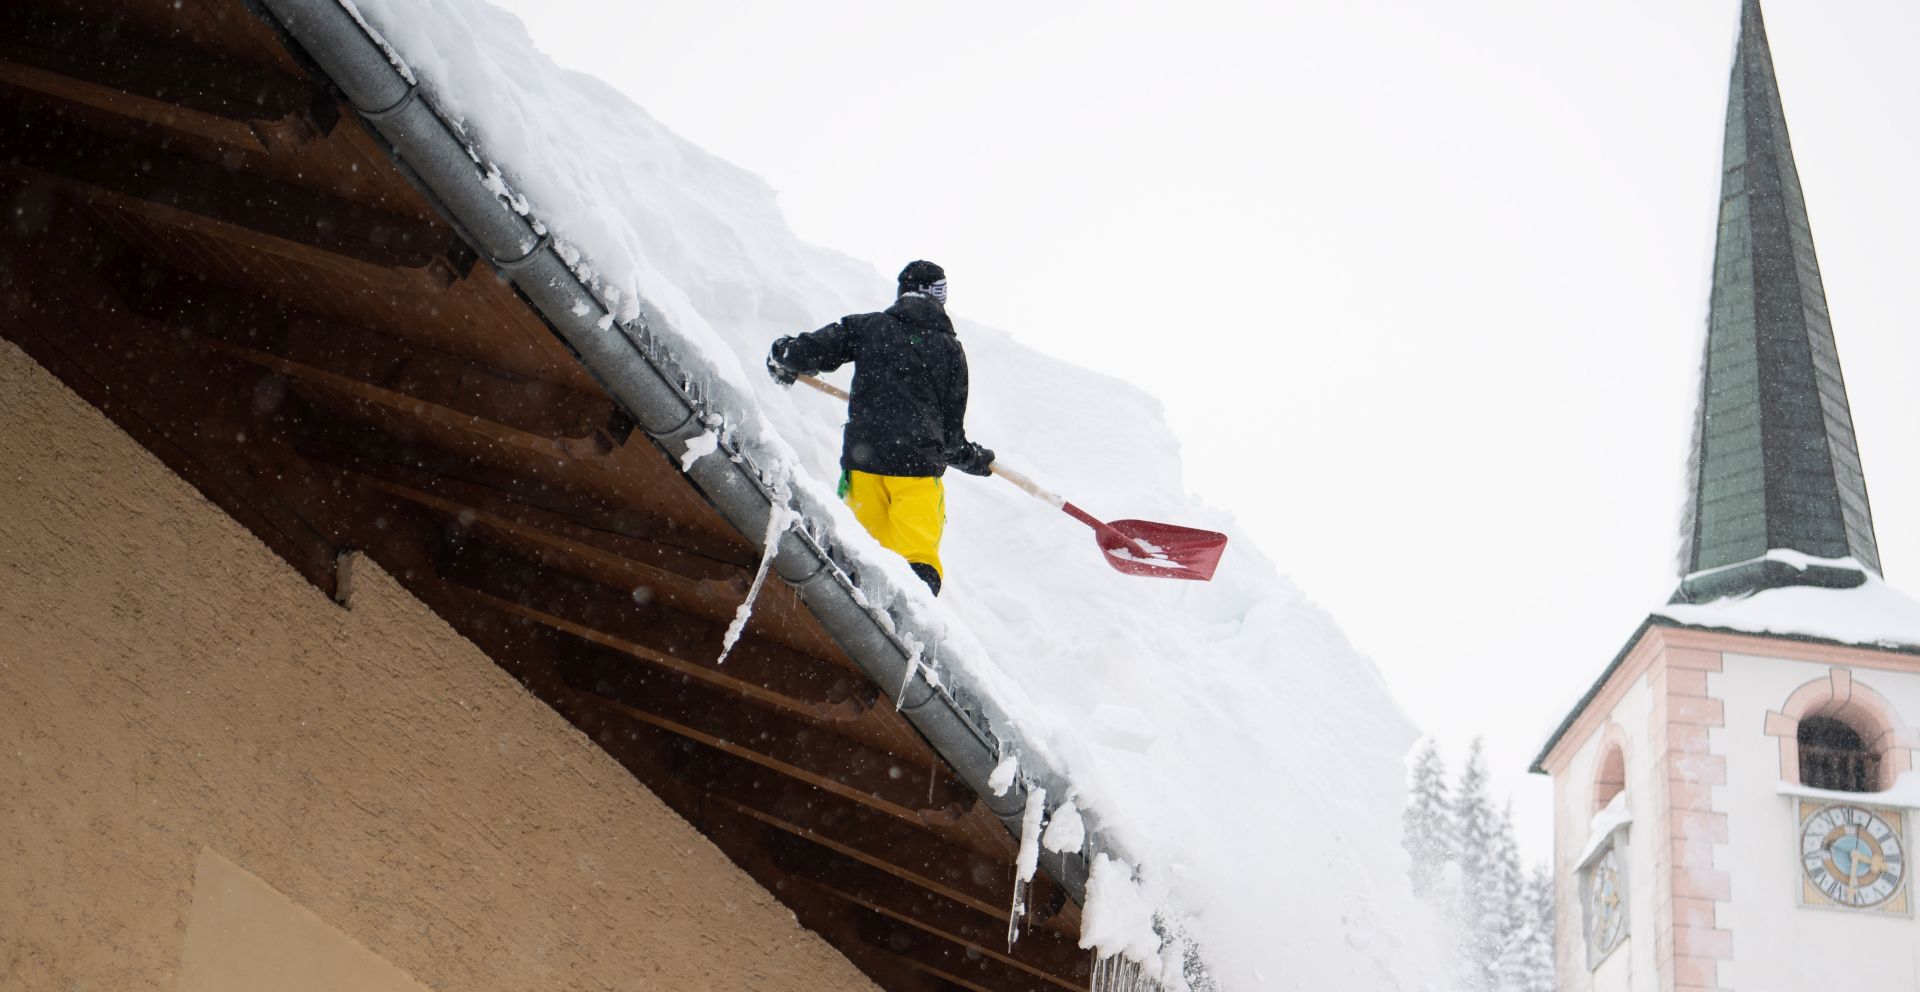 epa07269600 A msn tries to remove snow from a roof of a house in Filzmoos, Austria, 08 January 2019. Media reports state that many regions in Austria, Germany, Switzerland and northern Italy have been affected by heavy snowfalls in the last days. About 12,000 tourists have been cut off in Austrian ski area due to weather conditions and avalanche risk. Meteorologists predict more significant snowalls in upcoming days in Germany, Austria and Switzerland.  EPA/CHRISTIAN BRUNA